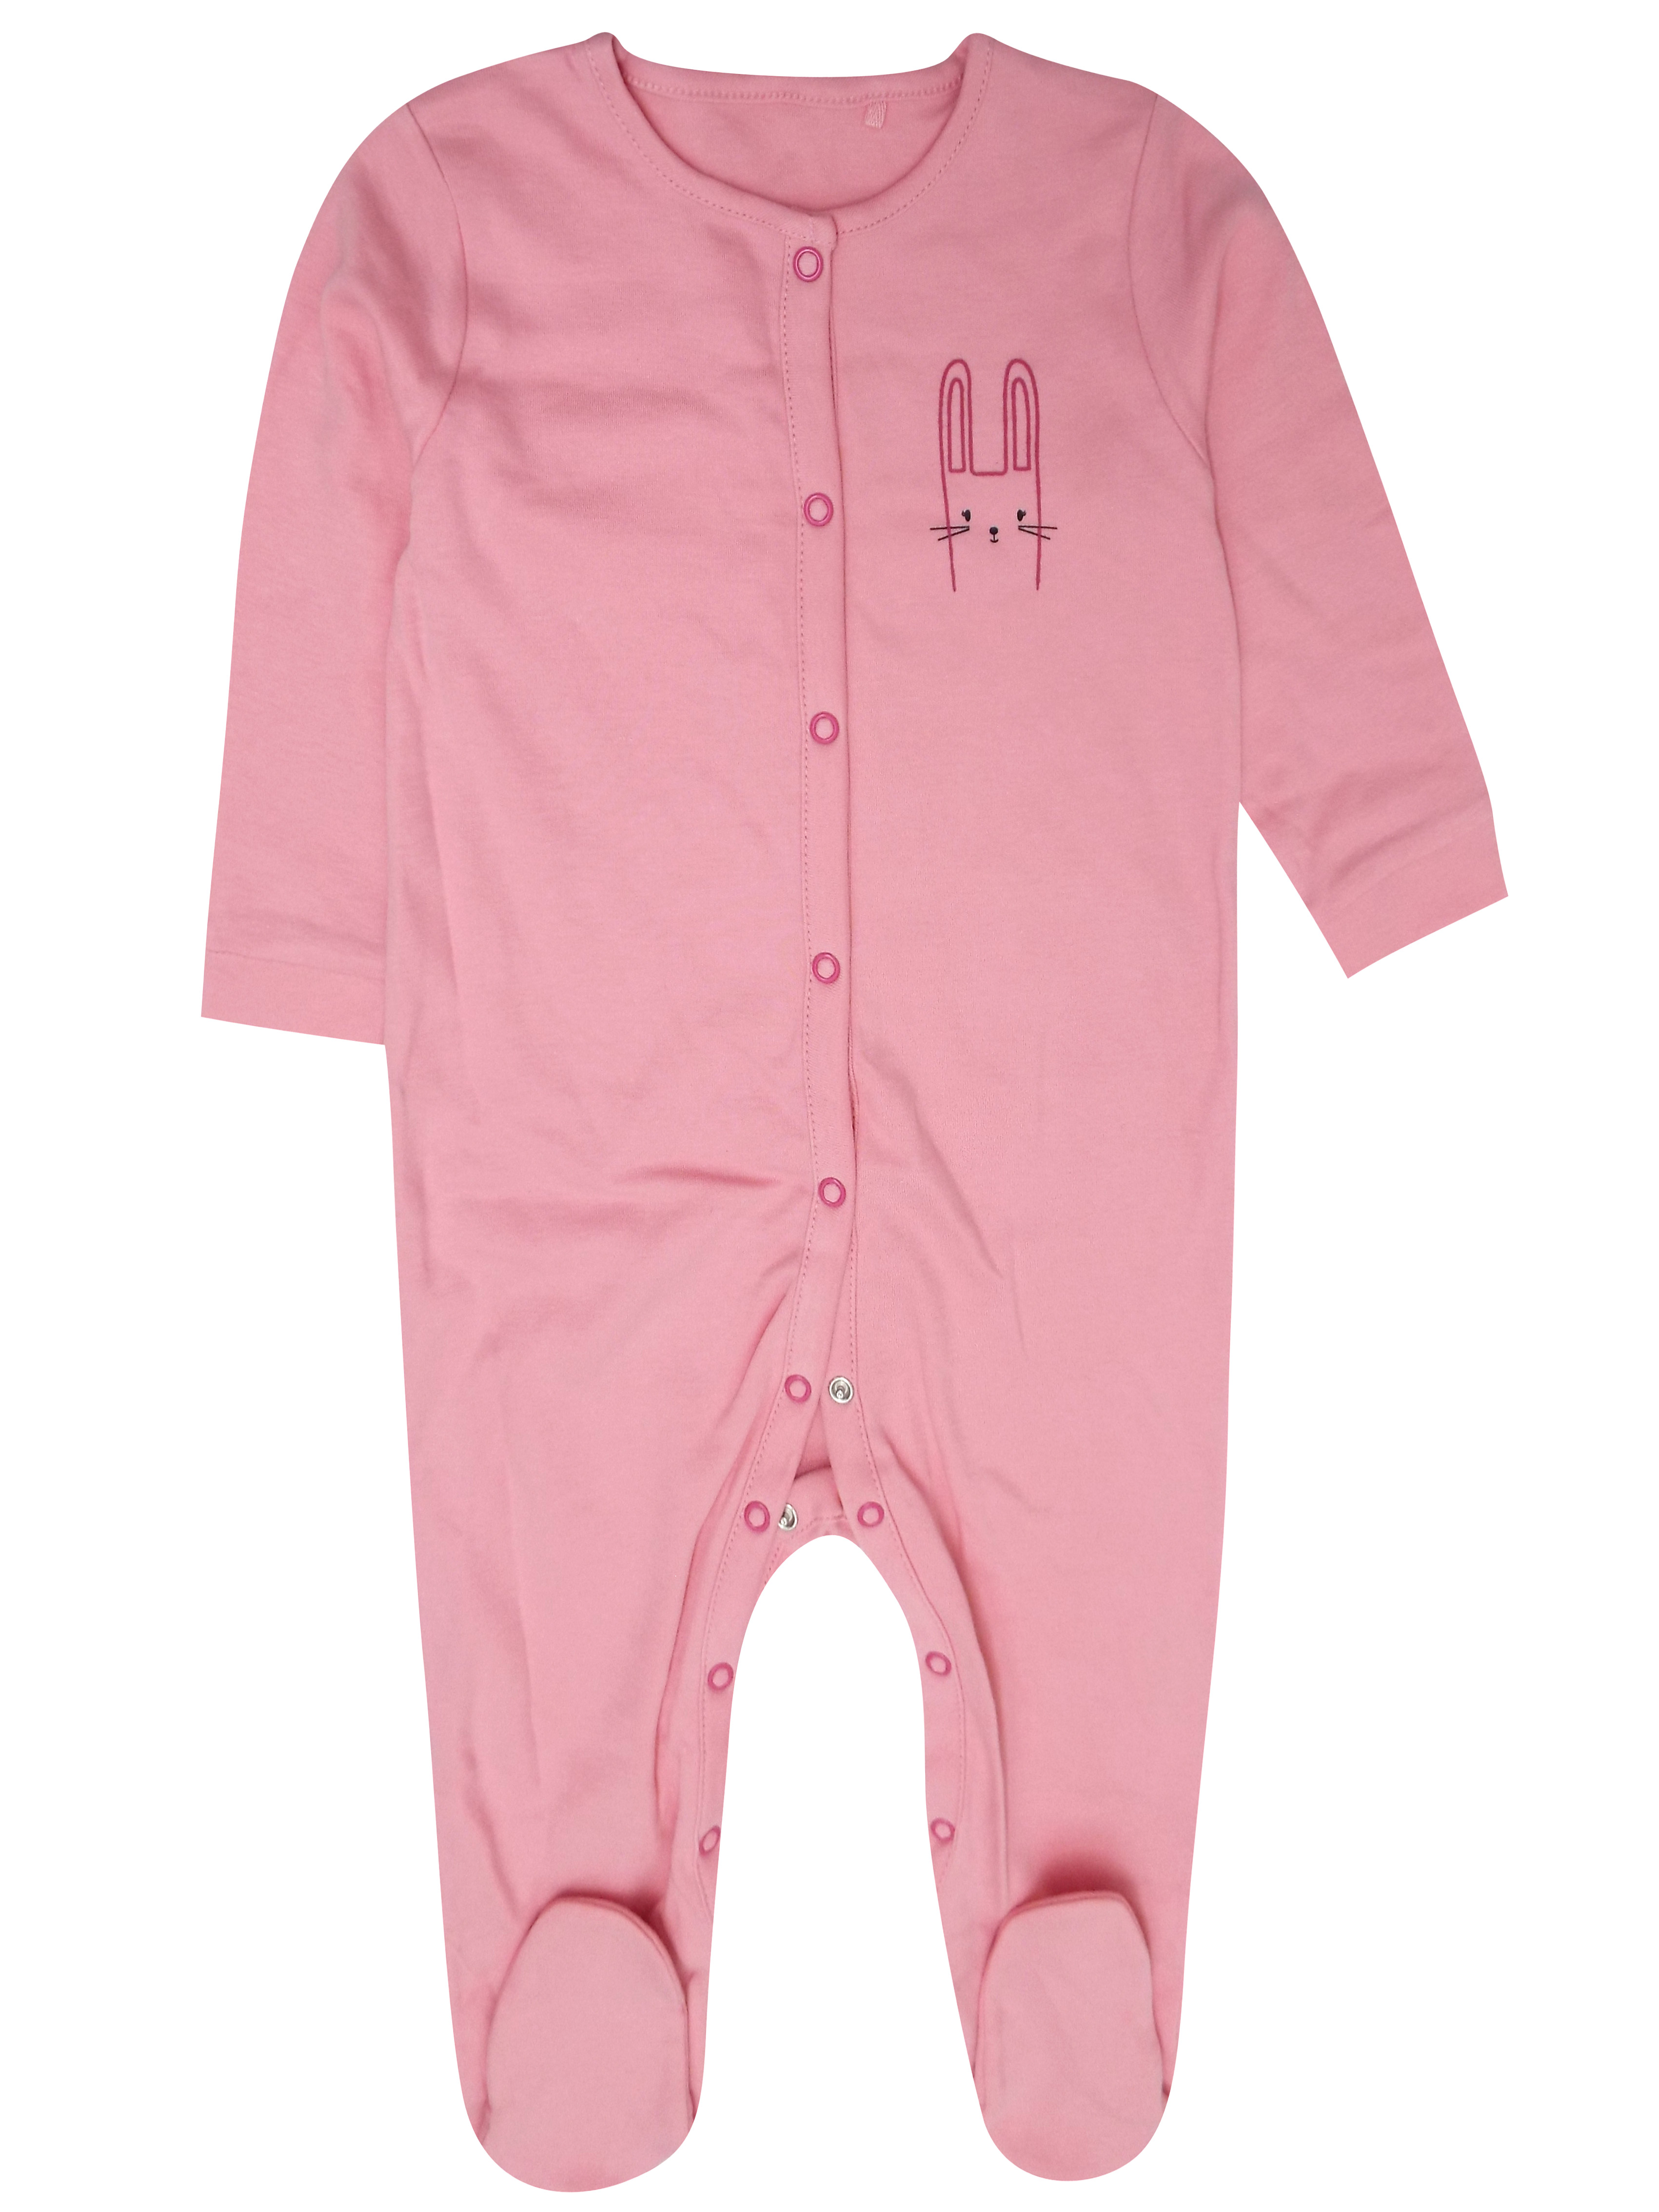 N3XT PINK Baby Girls Pure Cotton Bunny Sleepsuit - Size 12/18M